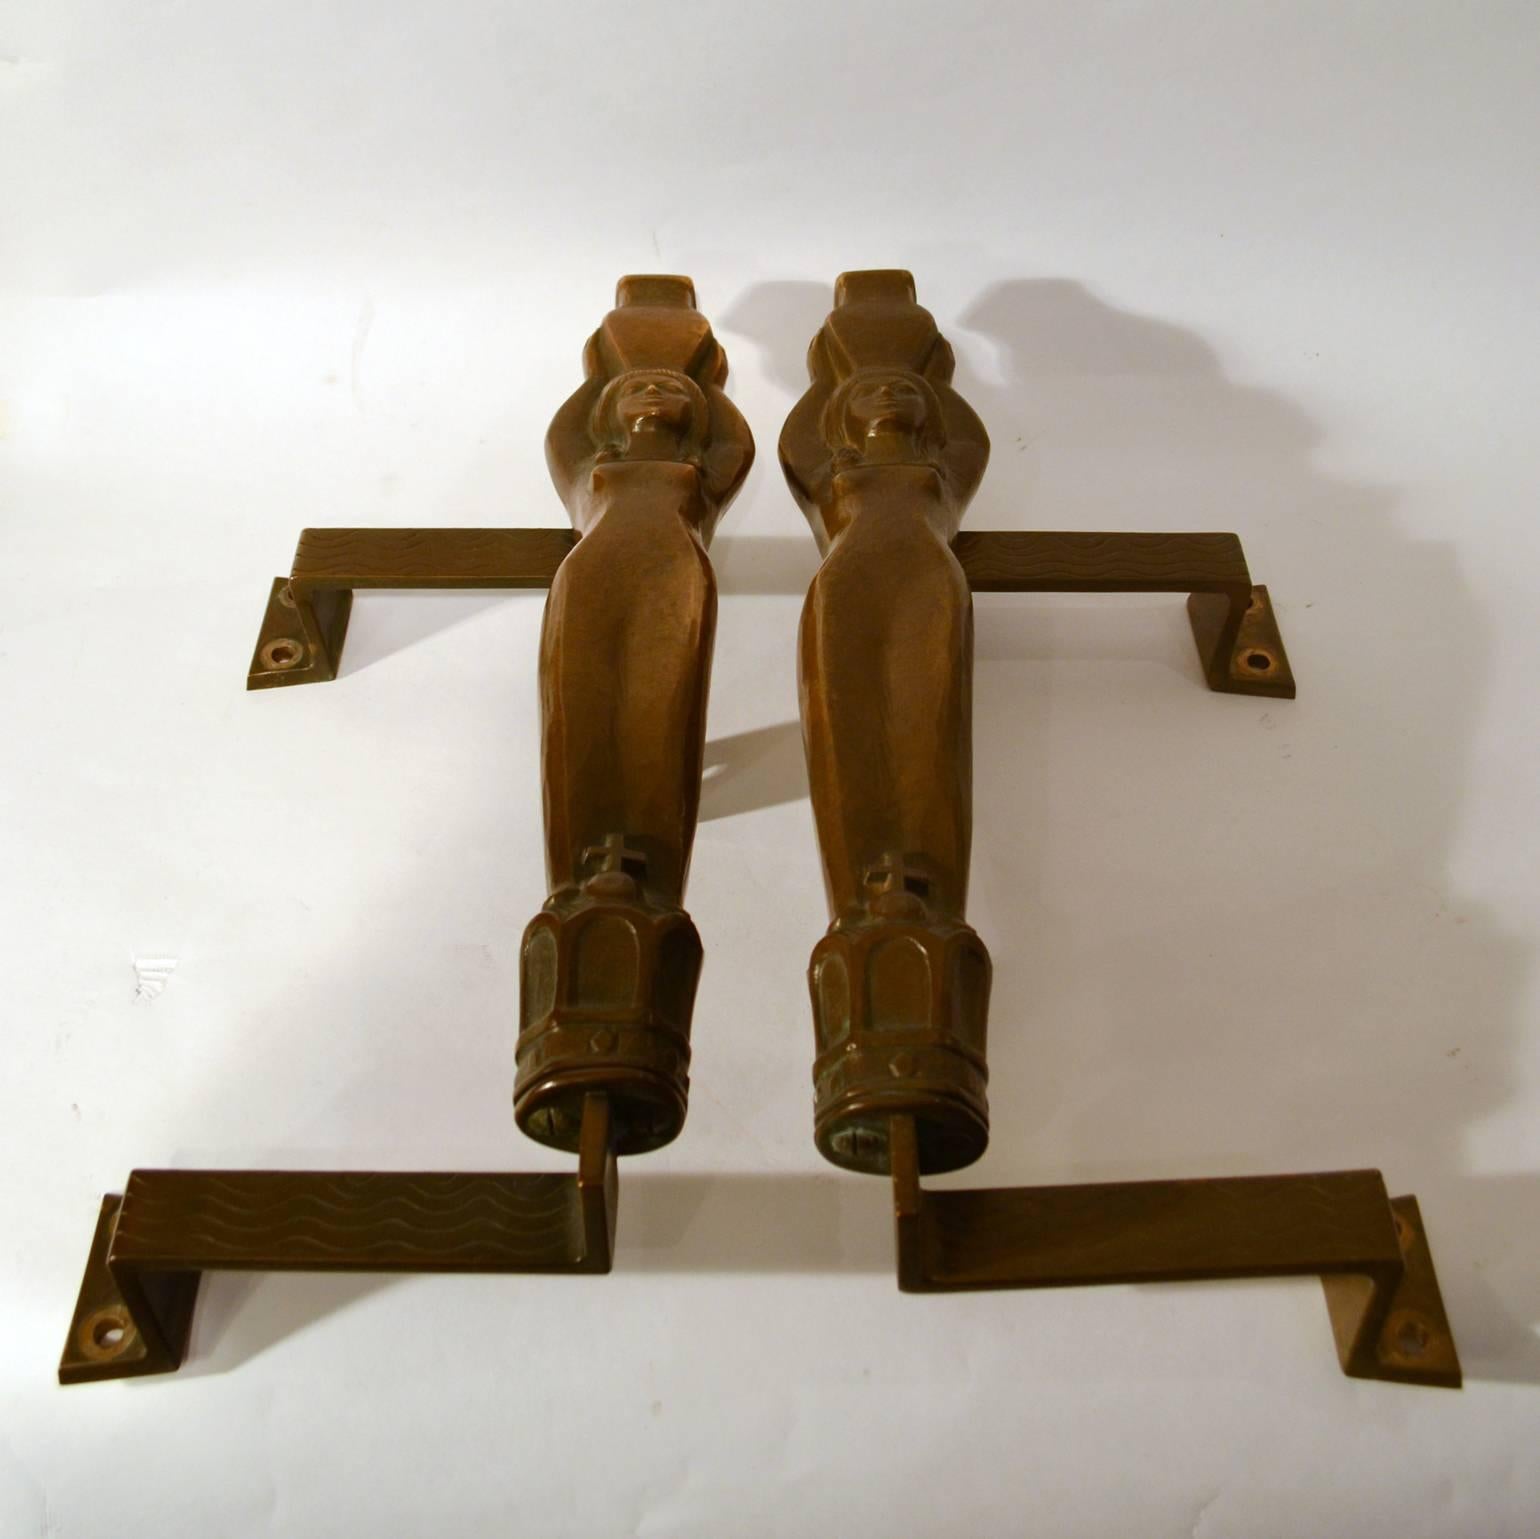 Art Nouveau push and pull door handles in the shape of two water nymphs, originally from spa in the Alps.
Original large handles express the water nymphs carrying water jugs on their heads while they stand on crowns. The brackets are decorated with